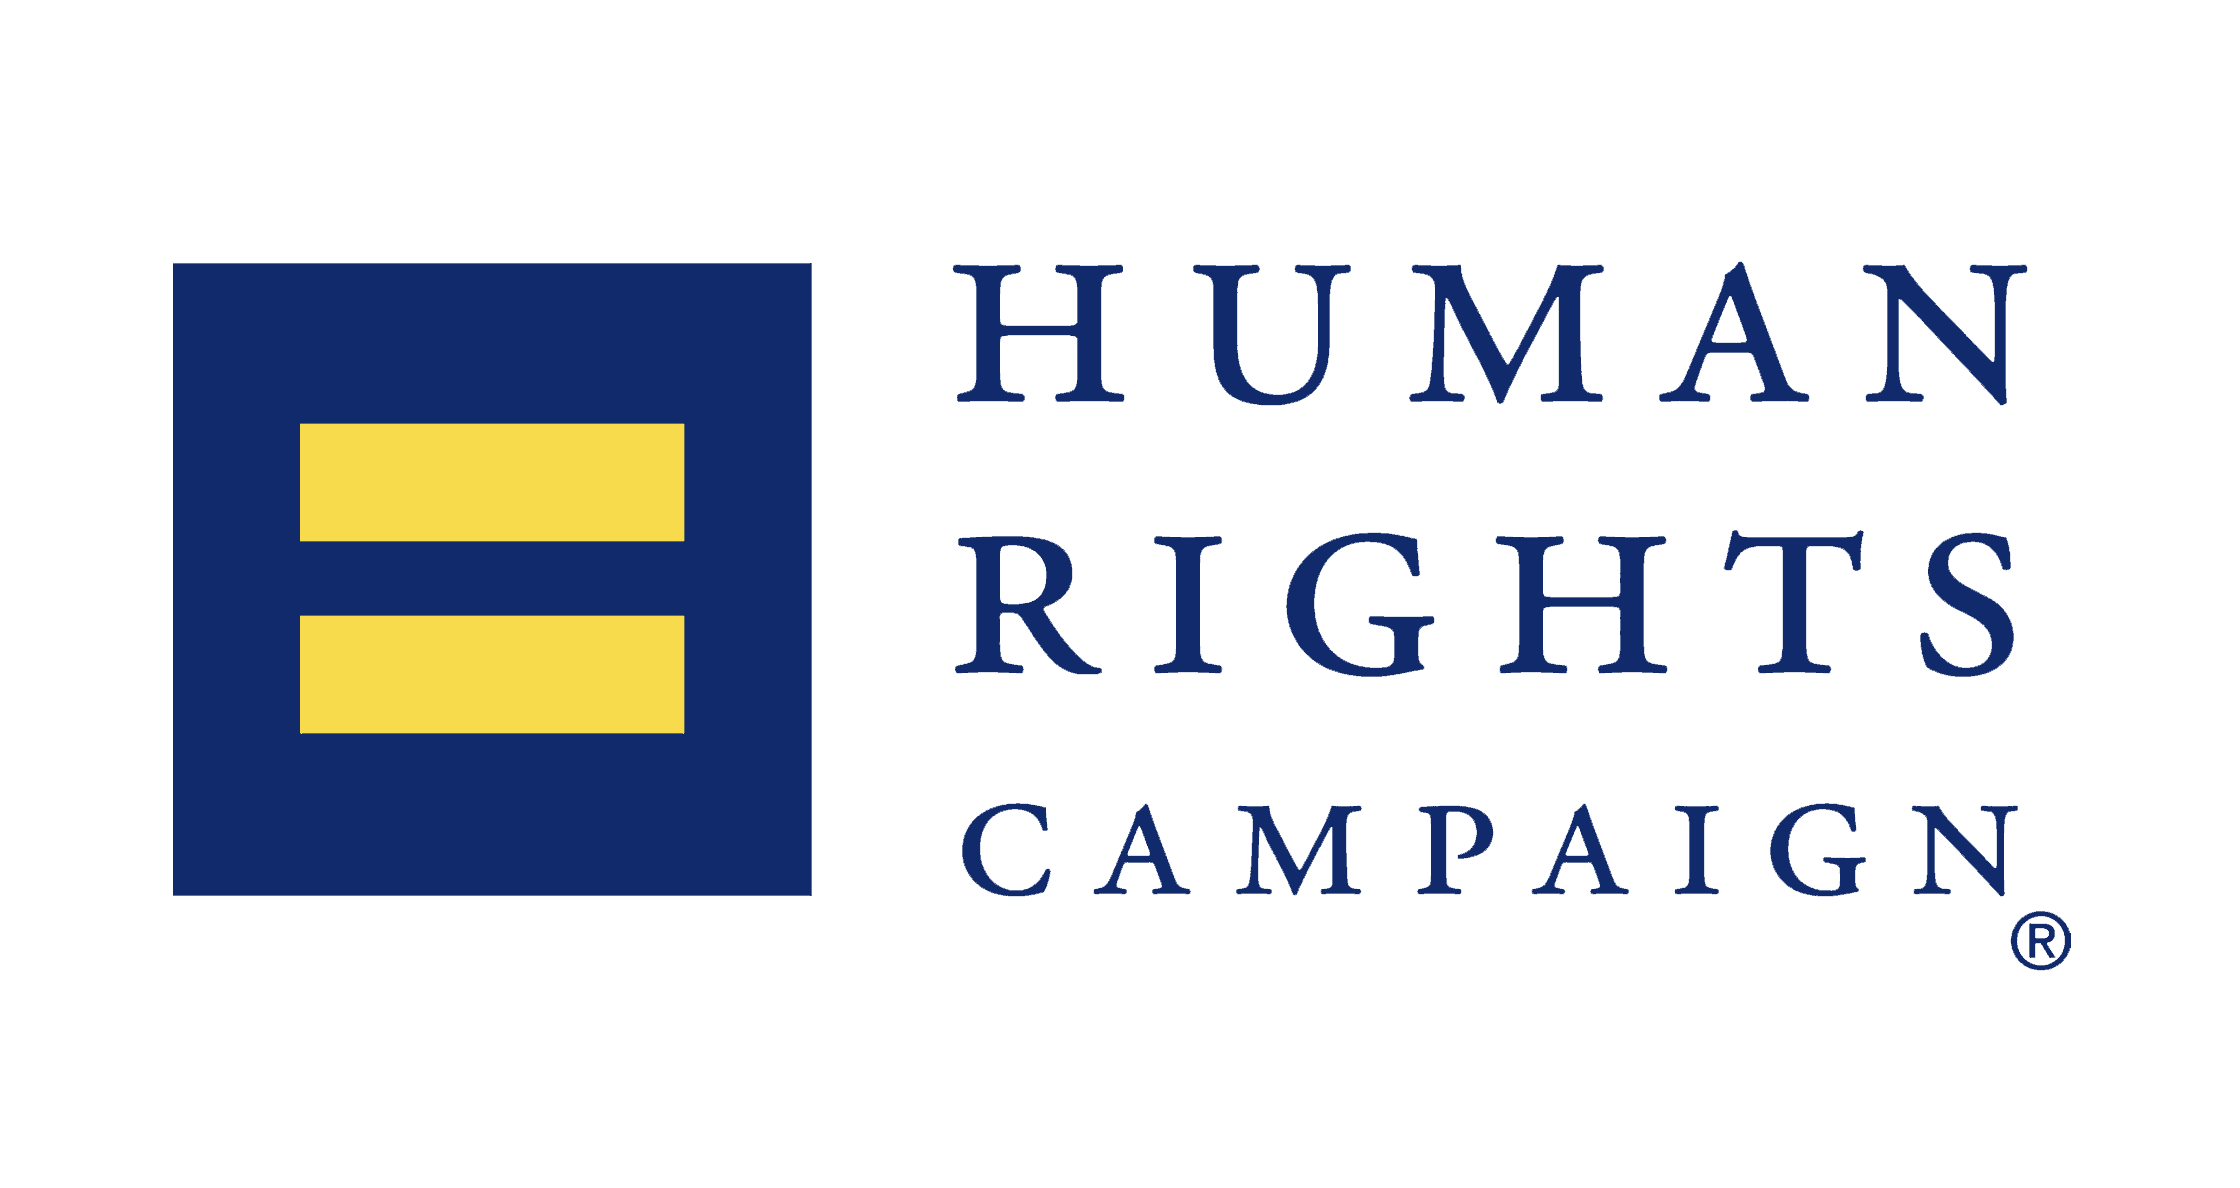   Human Rights Campaign     HRC is the largest LGBTQ+ advocacy group and LGBTQ+ political lobbying organization in the United States, providing a number of legislative initiatives as well as supporting resources for LGBTQ+ individuals.   